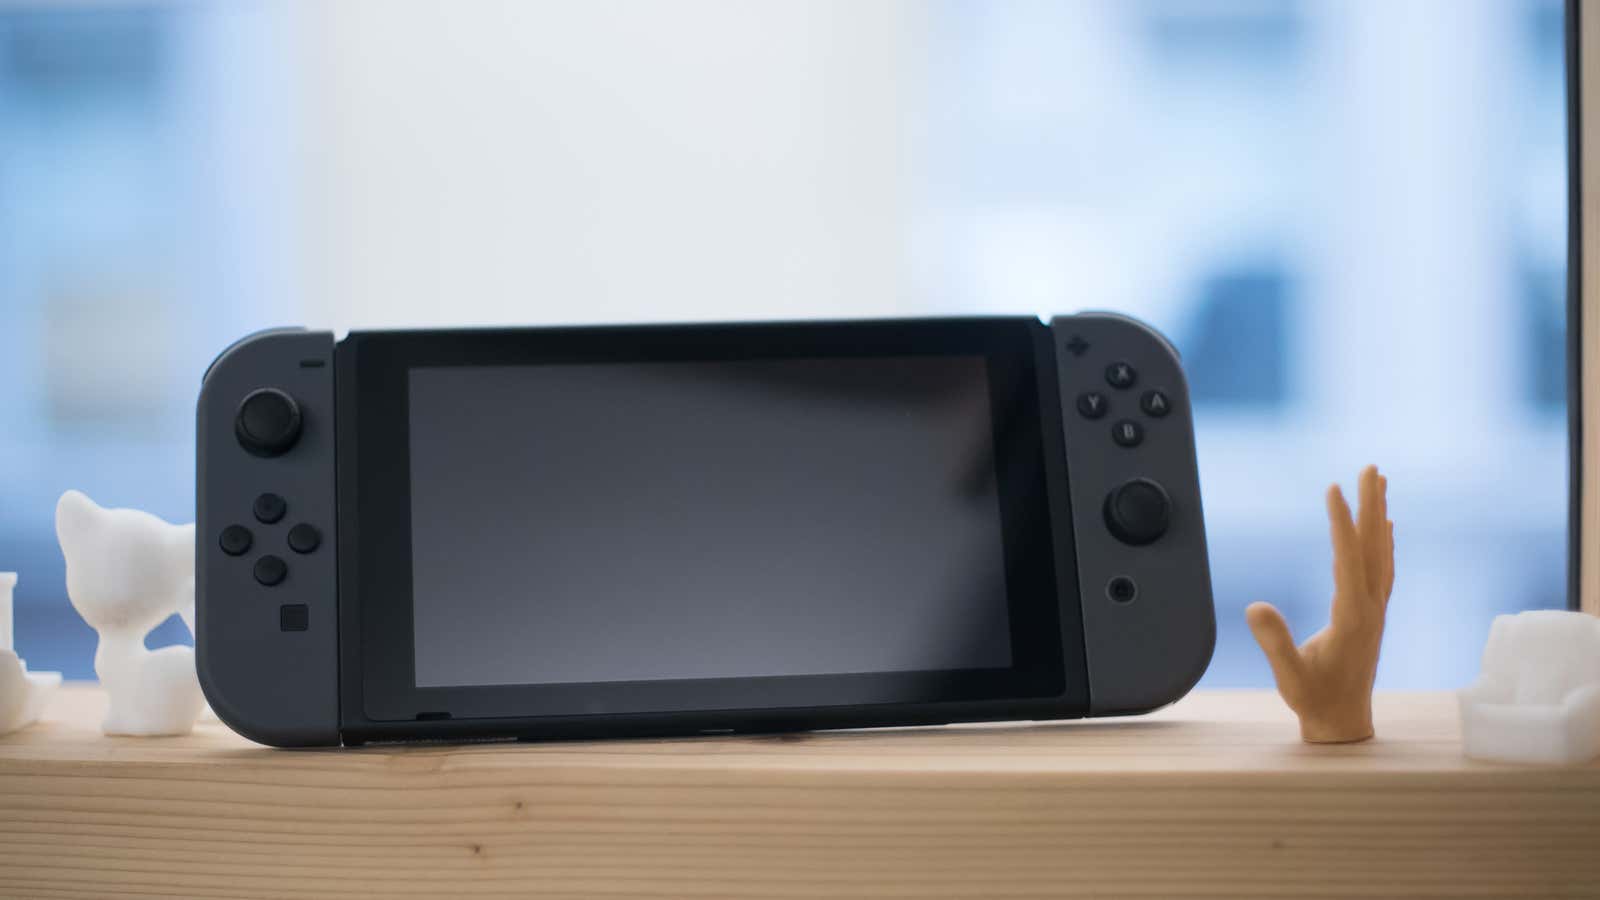 Wii U Mistakes Nintendo Should Avoid With Switch 2 Console